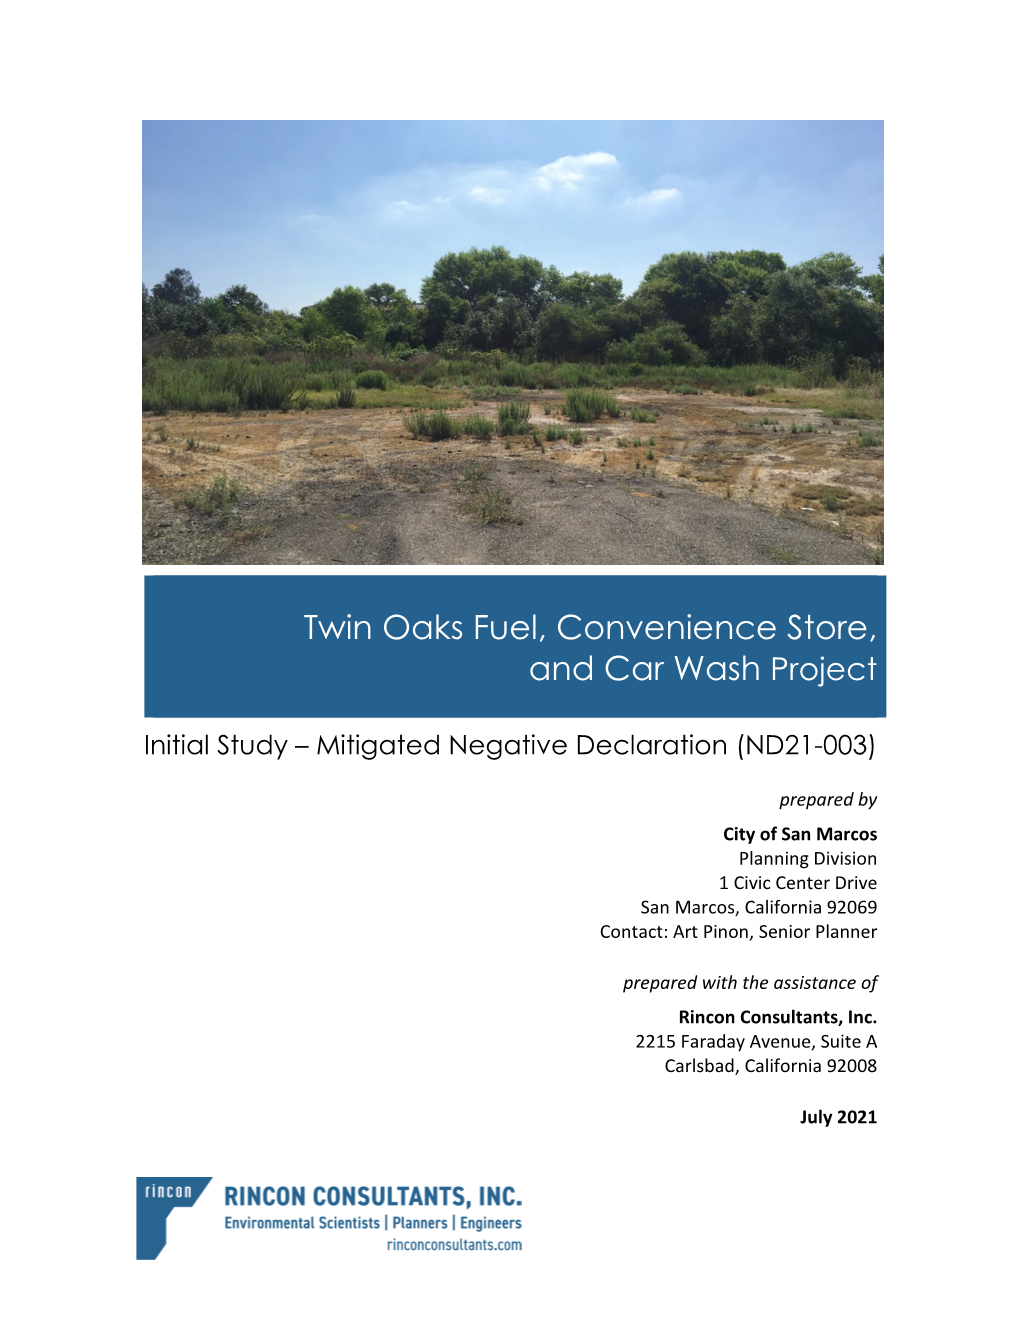 Twin Oaks Fuel, Convenience Store, and Car Wash Project